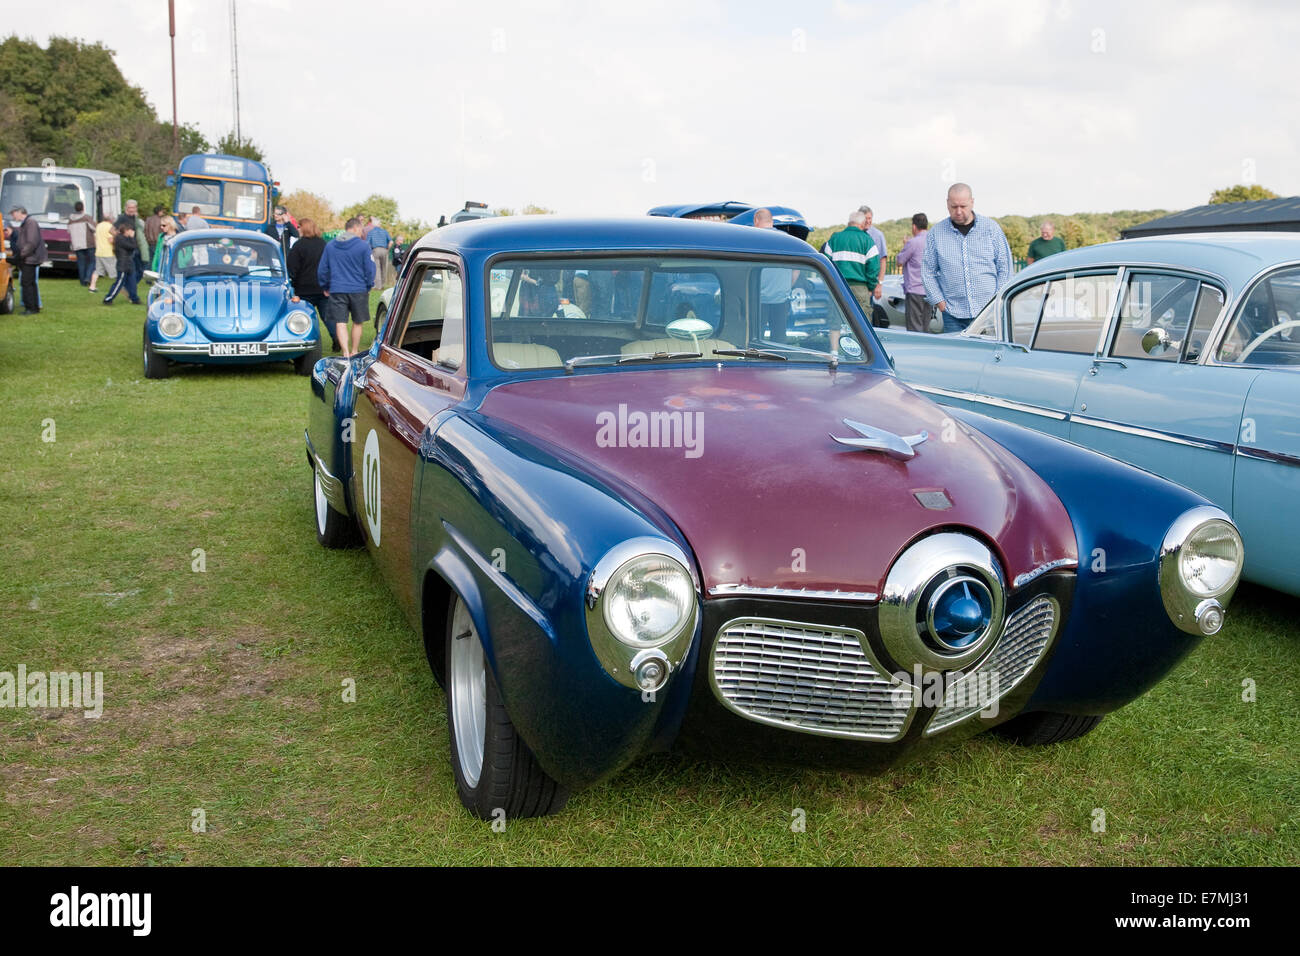 Blue studebaker coupe 5700cc 1991 at the St Christopher's Hospice Classic Car Show which took place in Orpington, Kent Stock Photo